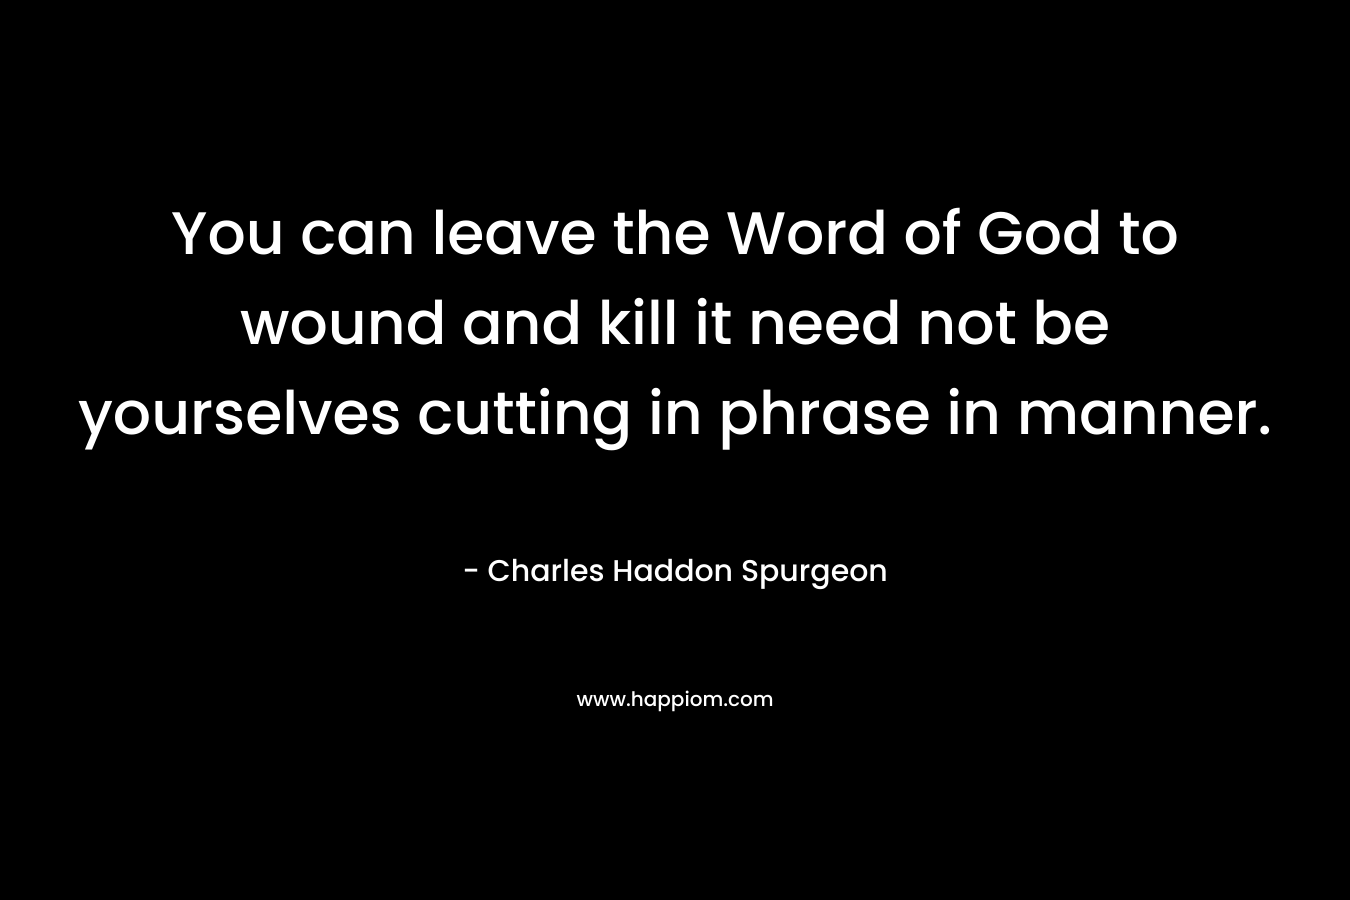 You can leave the Word of God to wound and kill it need not be yourselves cutting in phrase in manner. – Charles Haddon Spurgeon